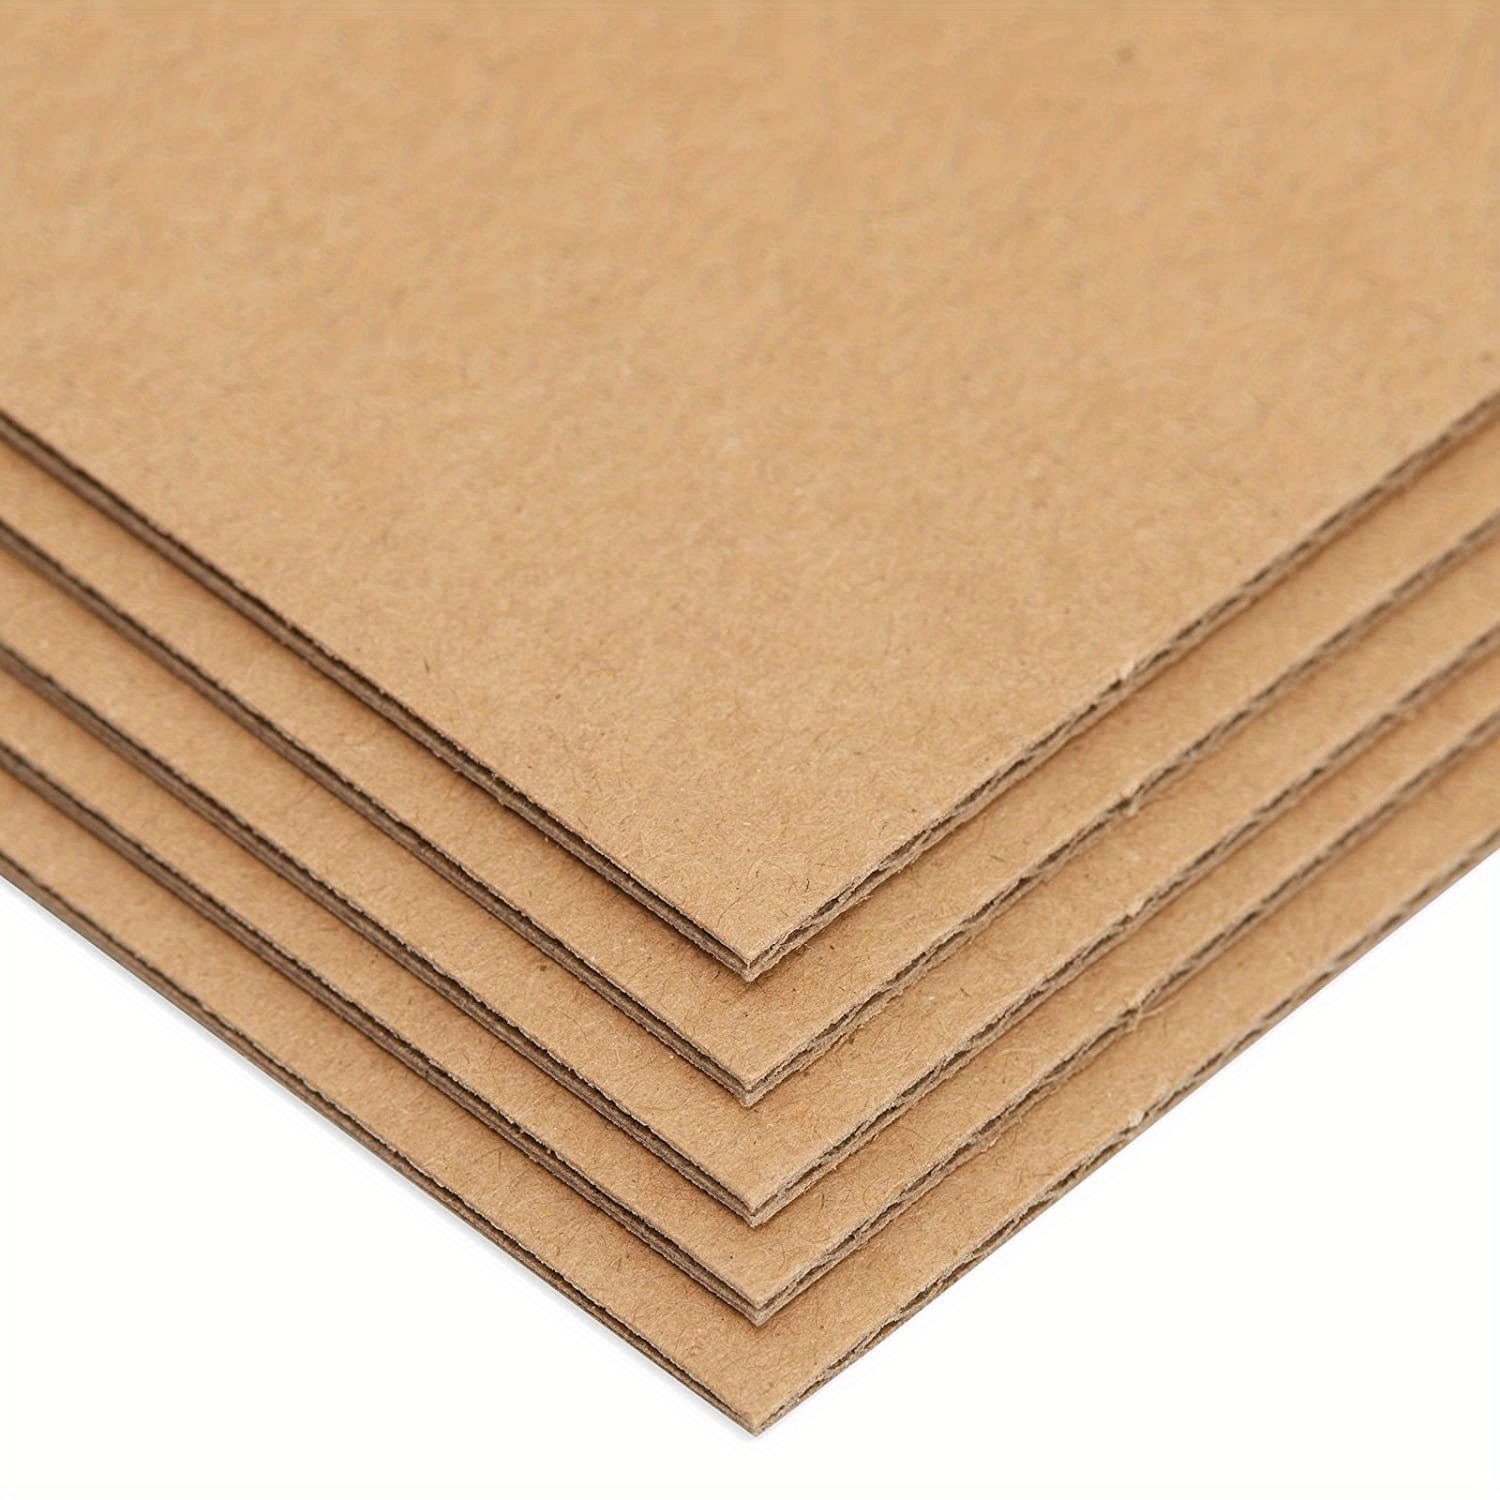 50-Pack of Corrugated Cardboard Sheets 9x12, Flat Card Boards, Packaging  Inserts for Shipping, Mailing, Arts and Crafts, DIY Projects, Packing  Mailers, 2mm Thick 